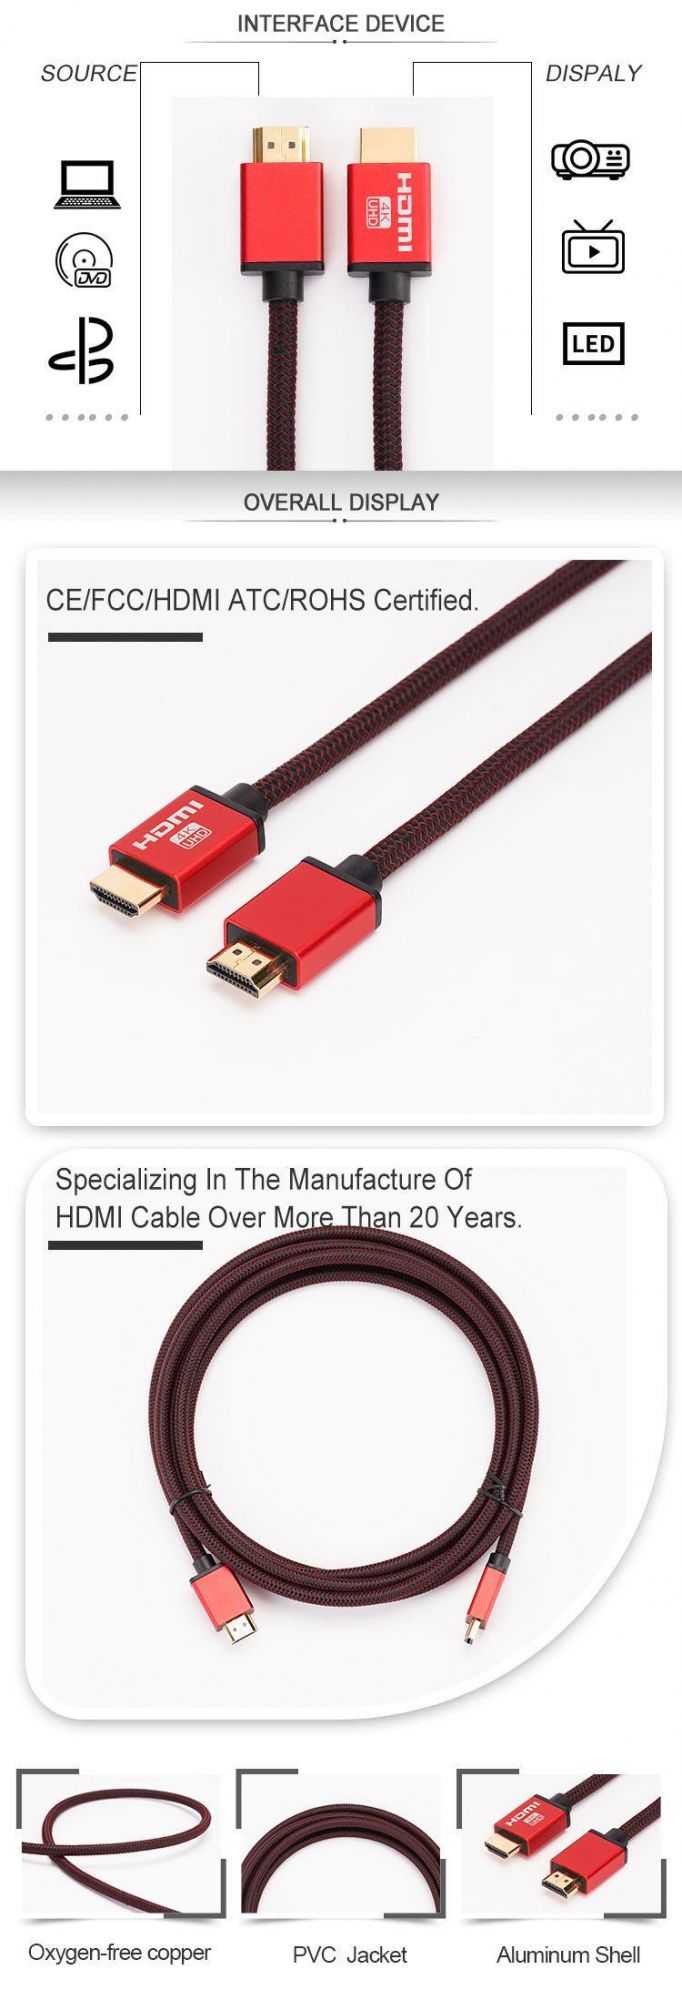 2M 3M 5M 1.5M 8M Support Hdr Functionality Hdmi 4K Cable Aluminum Connector 24-28Awg Male To Male Hdmi 20 Cable